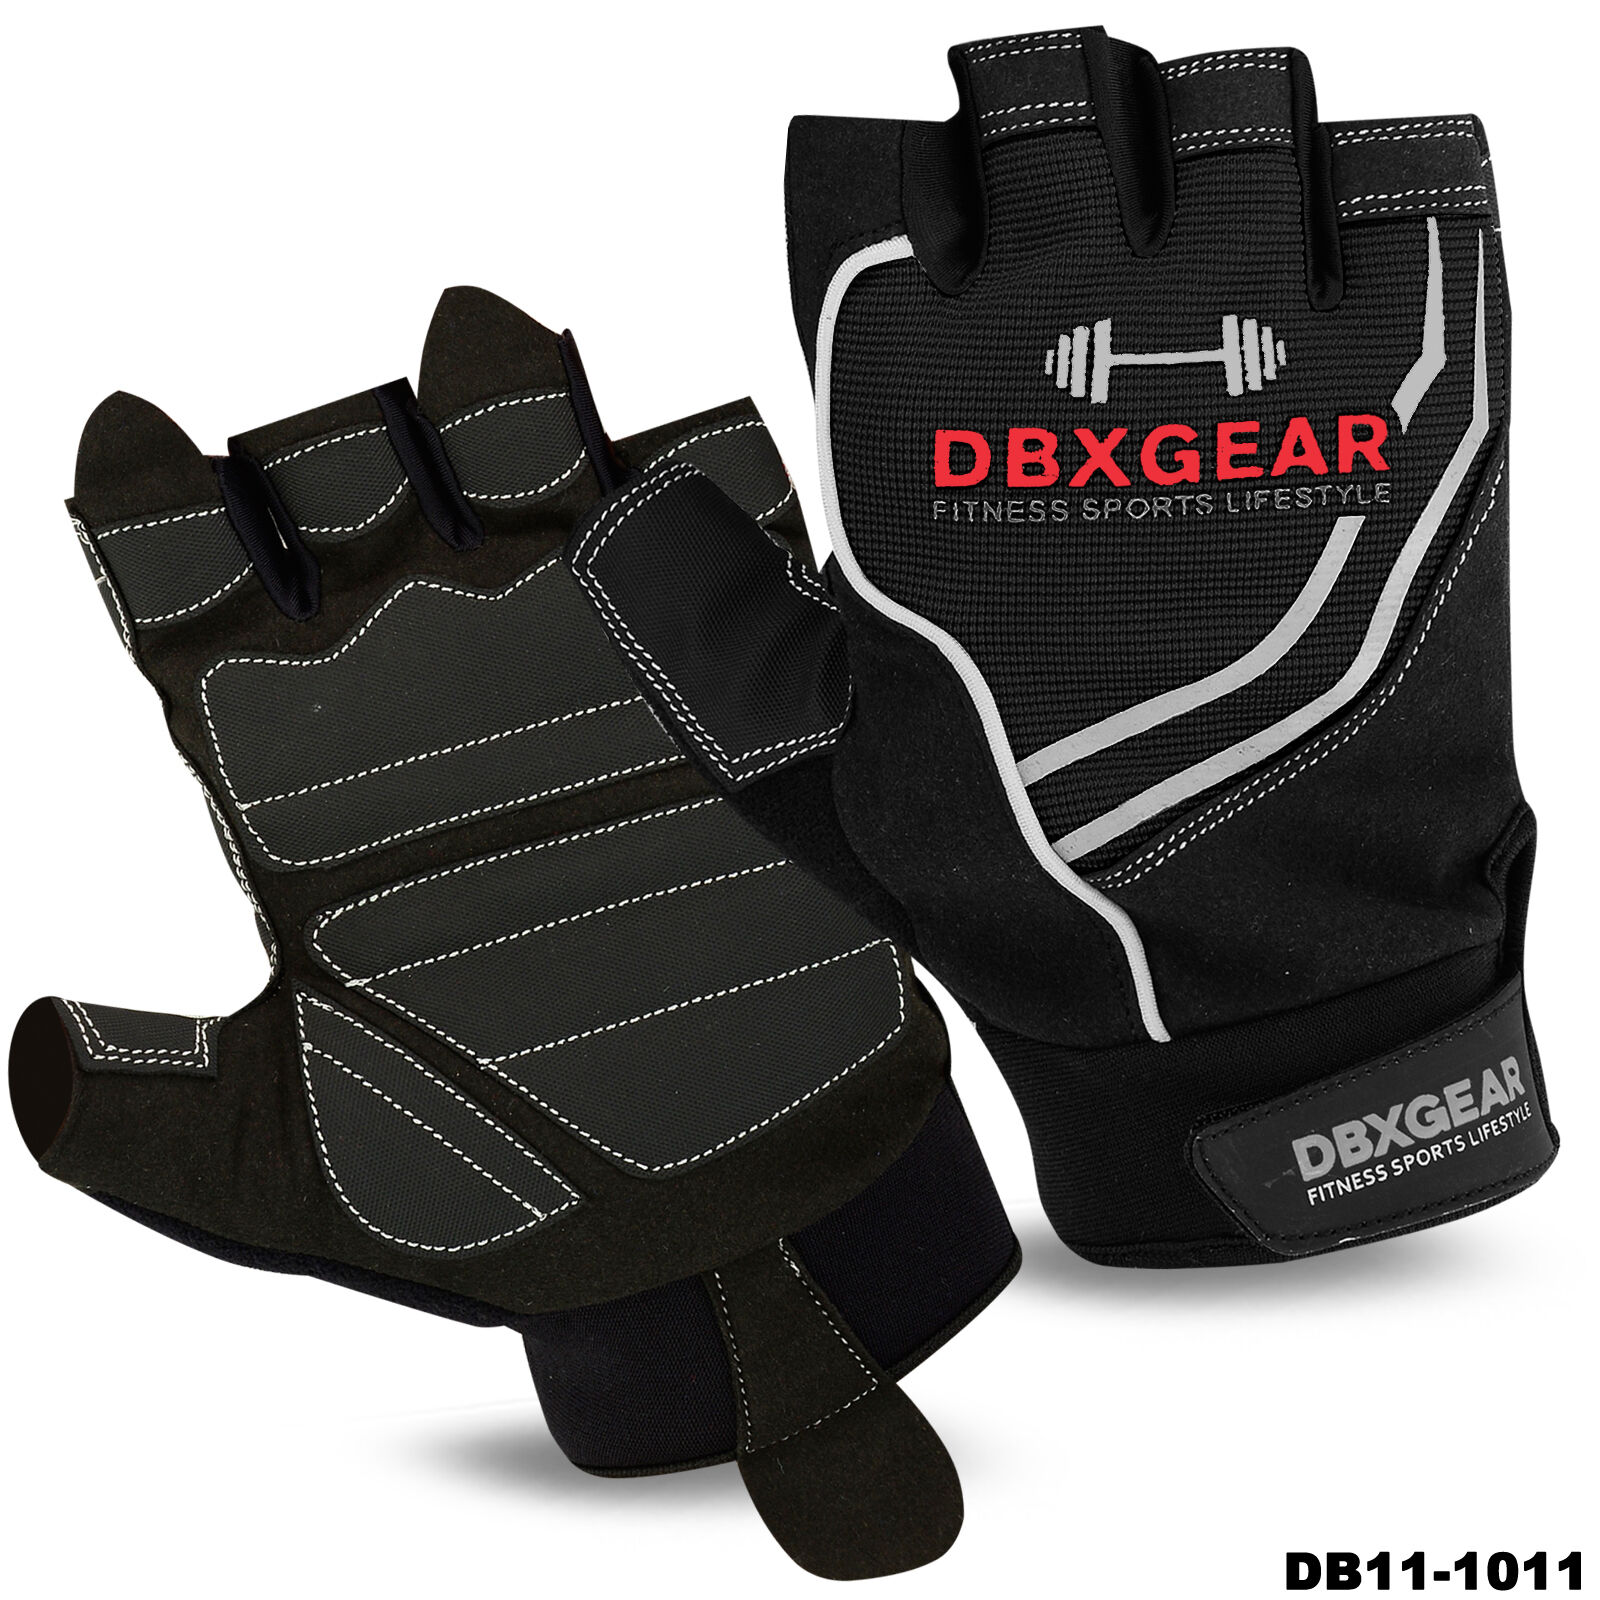 Exercise Gloves for Gym, Weightlifting, and Fitness